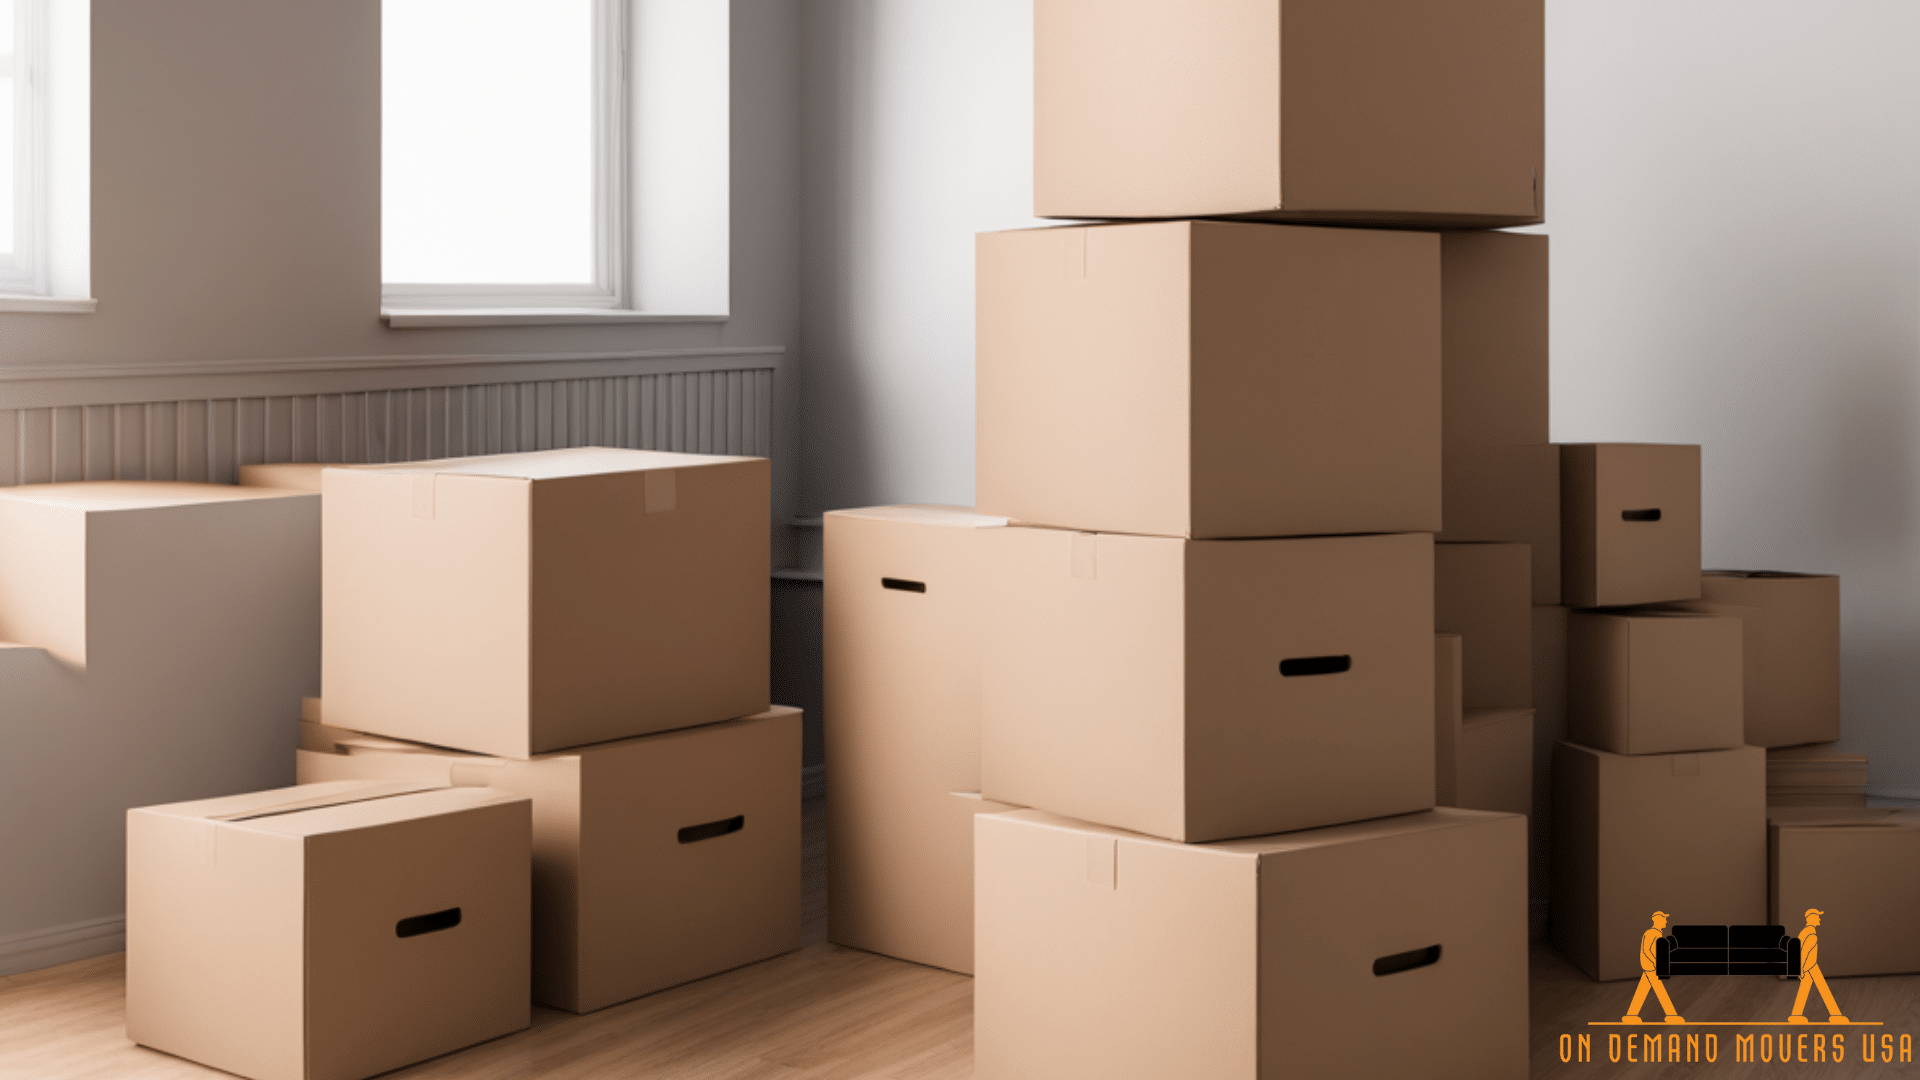 Packing and Moving Movers Companies in Deerfield Illinois